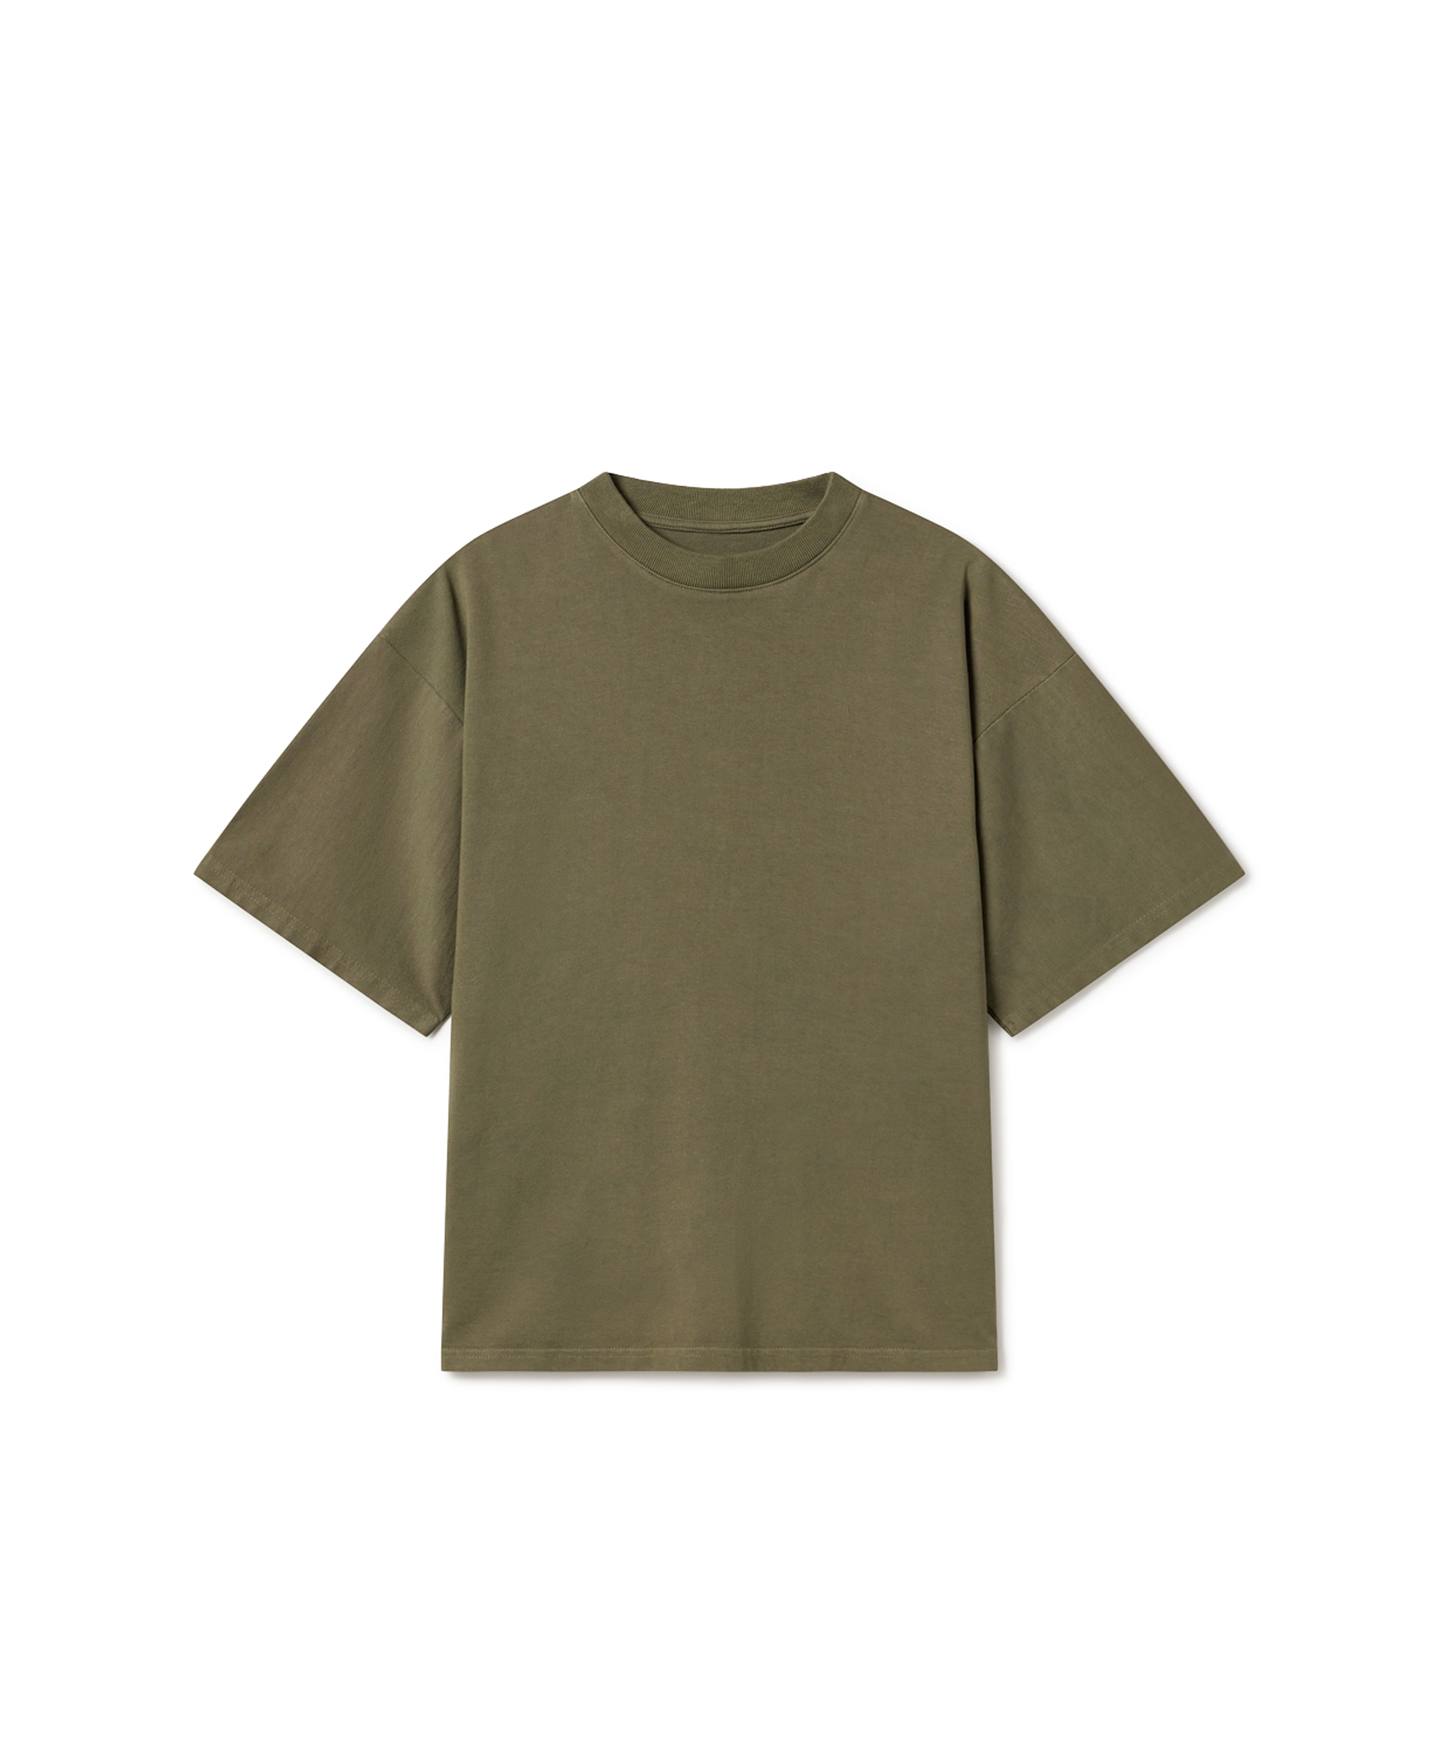 300 GSM 'Army Olive' T-Shirt